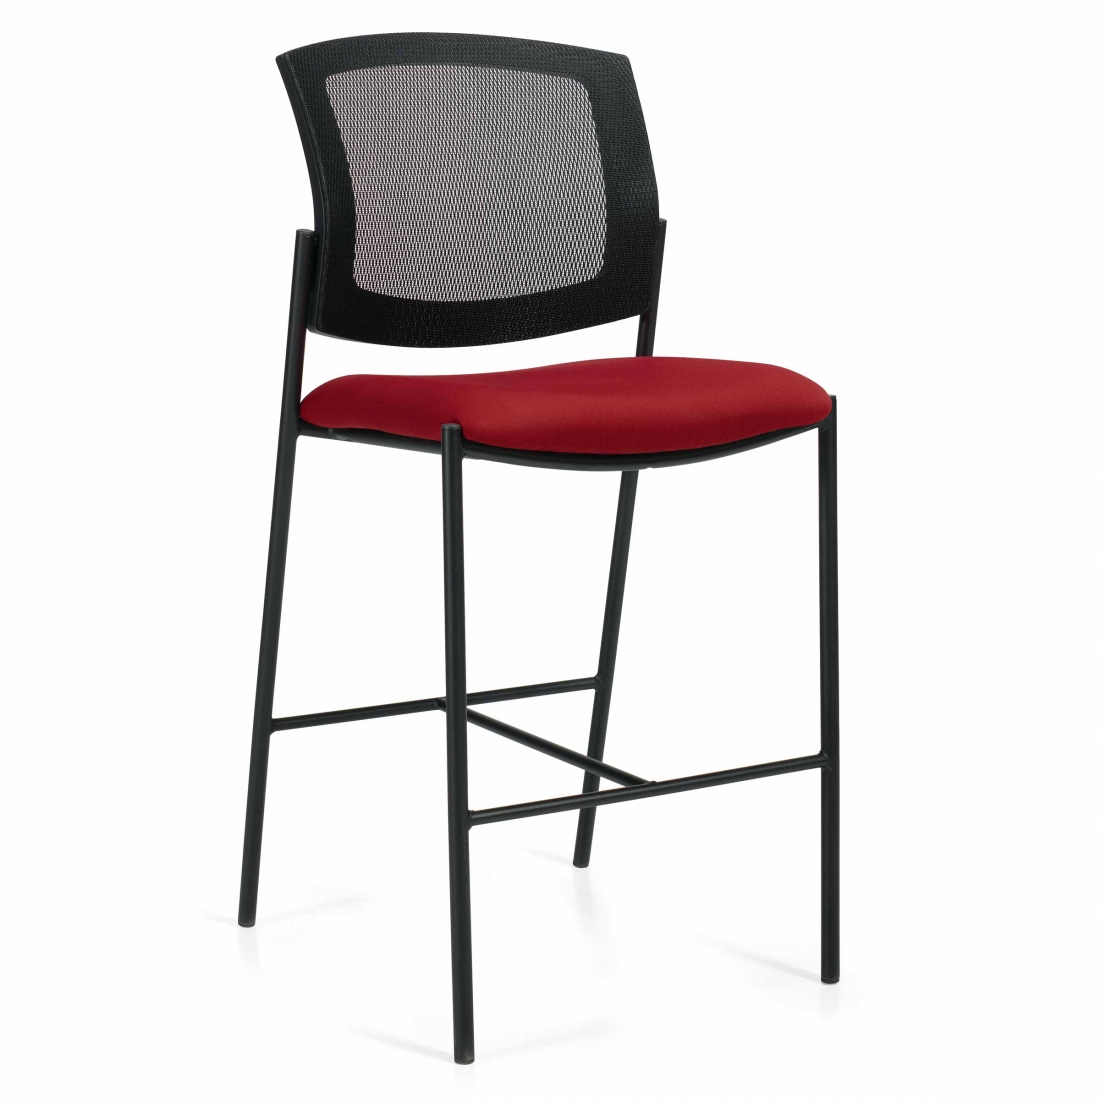 Ibex | Armless Mesh Back & Upholstered Seat Guest Bar Stool